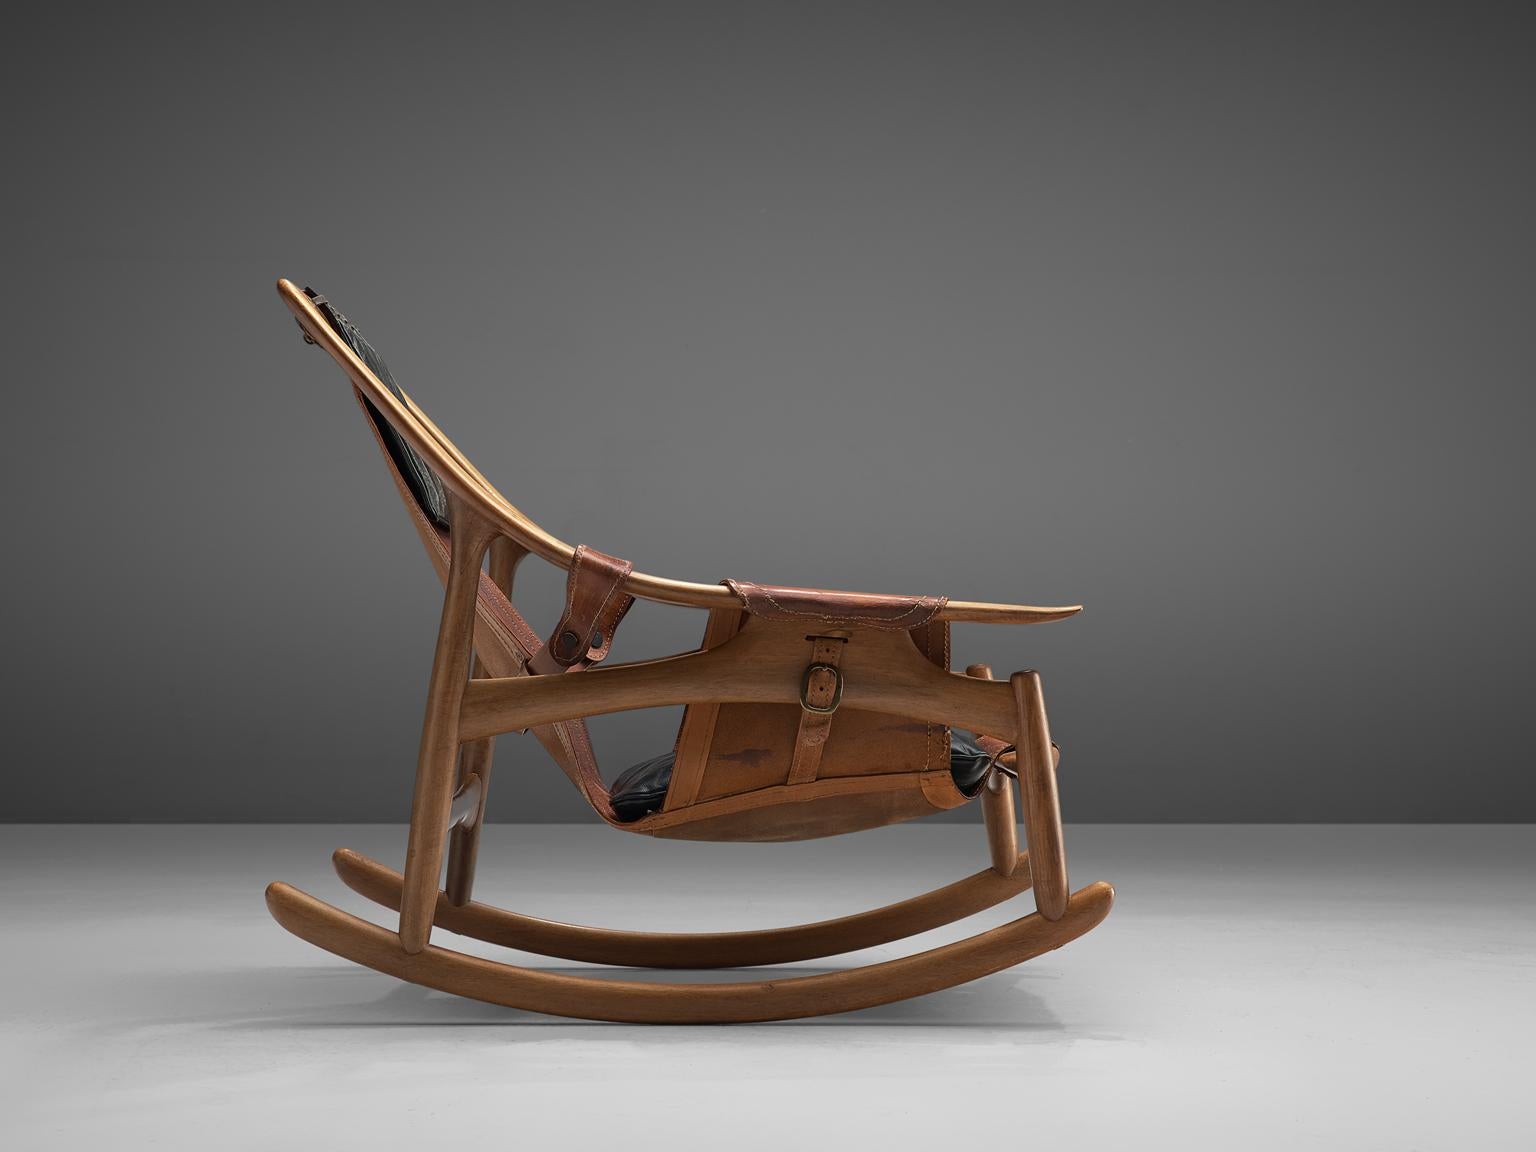 W. Andersag, rocking chair, teak and leather, Italy, 1960s.

This rocking chair by W. Andersag is very dynamic due it's design and shapes. The teak frame shows beautiful lines. The frame and construction reminds of the sturdy hunting chairs. Thick